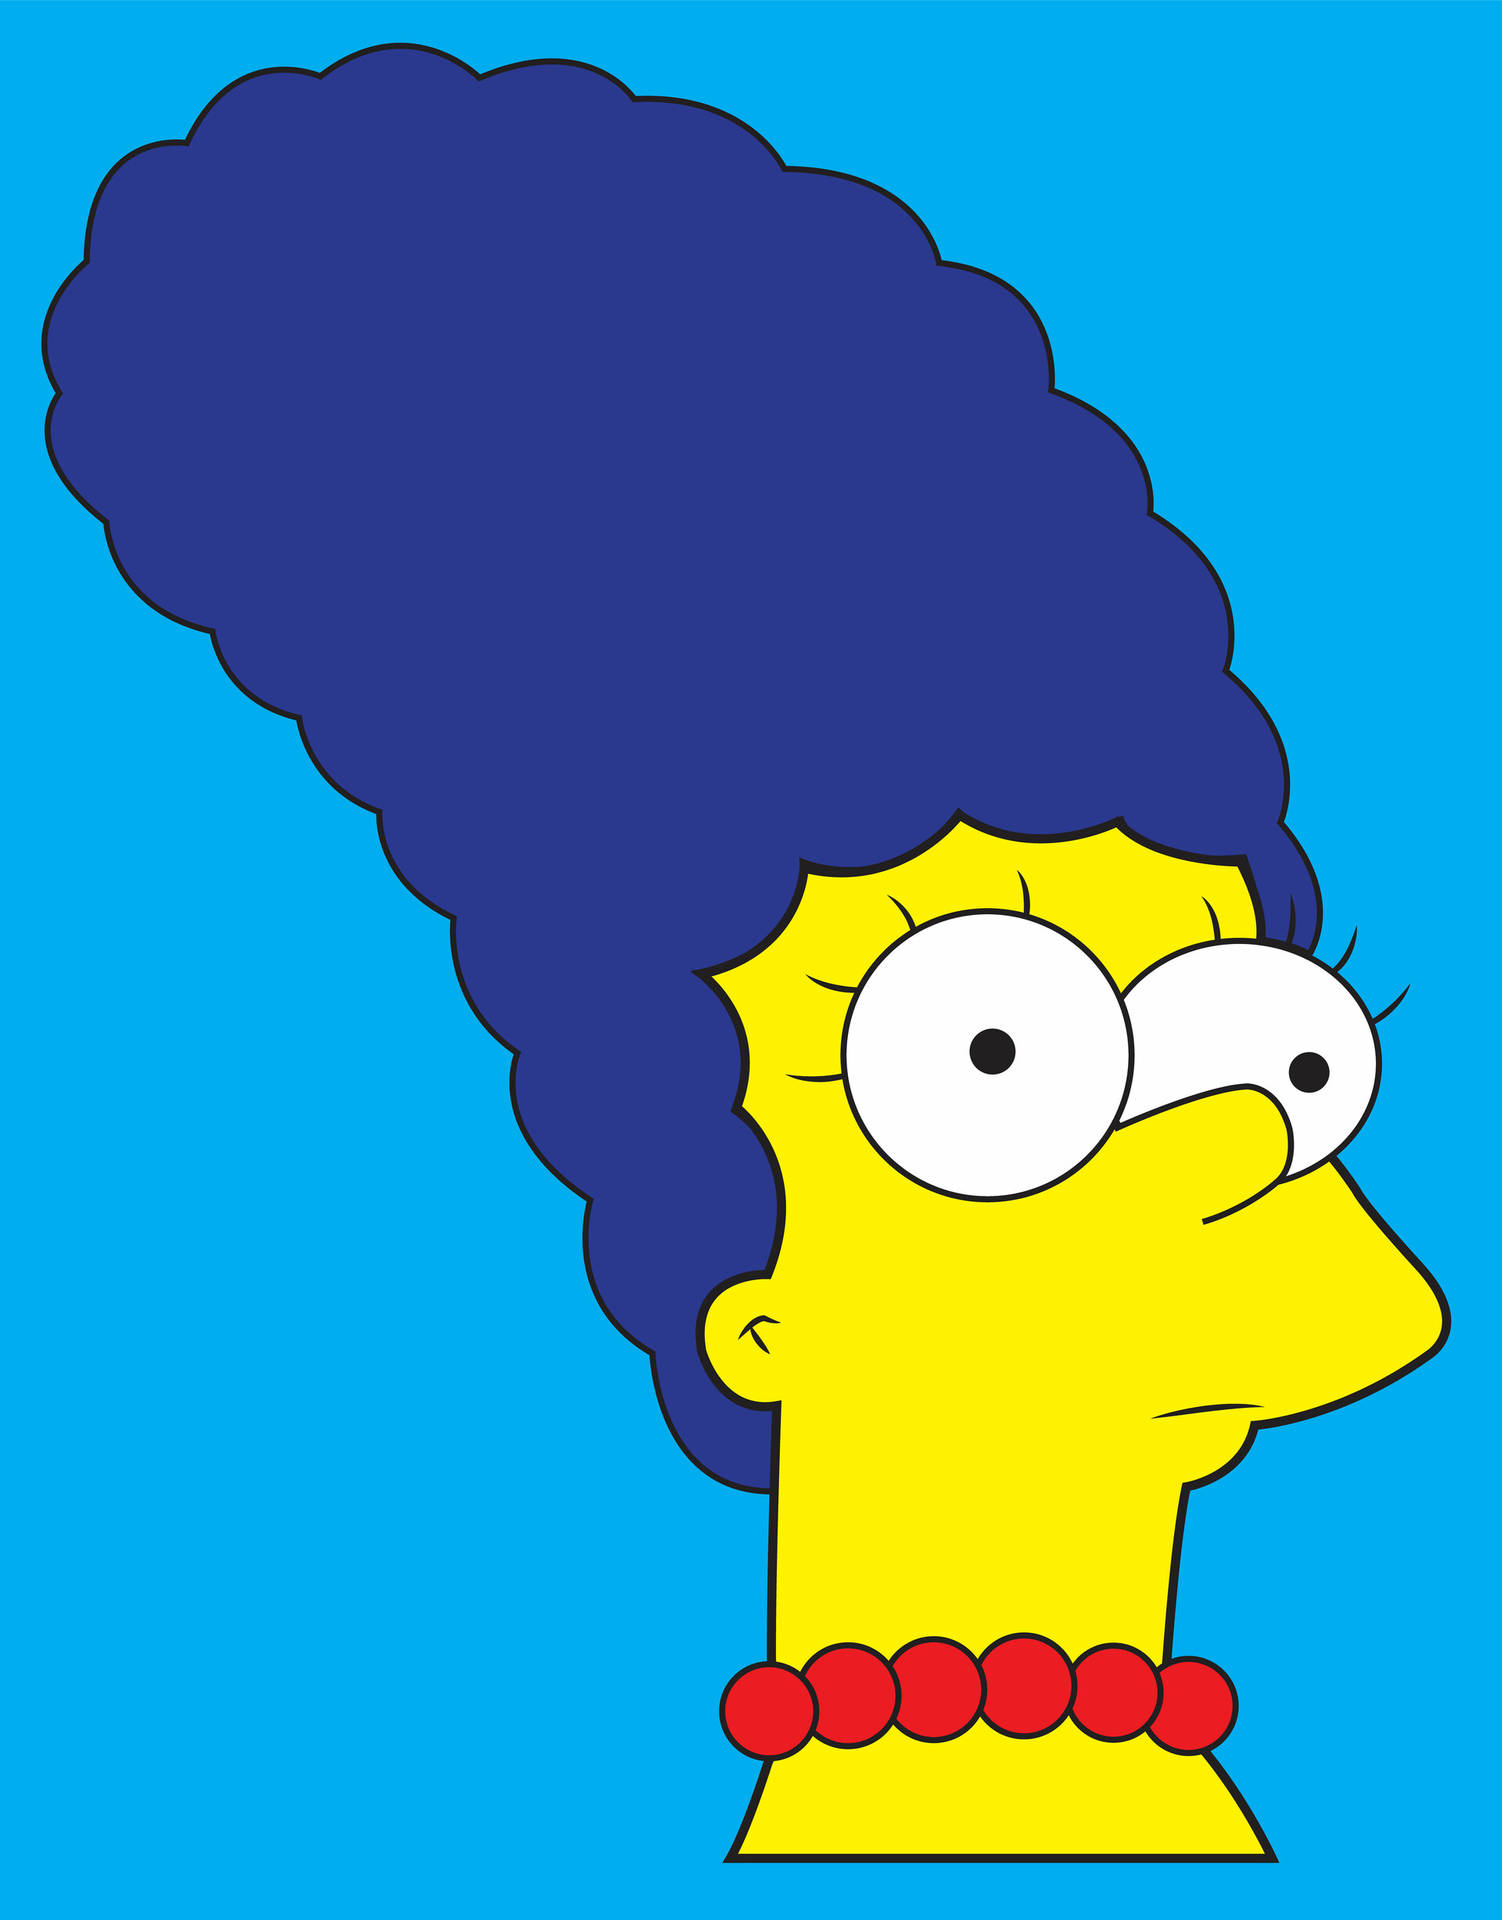 Marge Simpson From The Simpsons